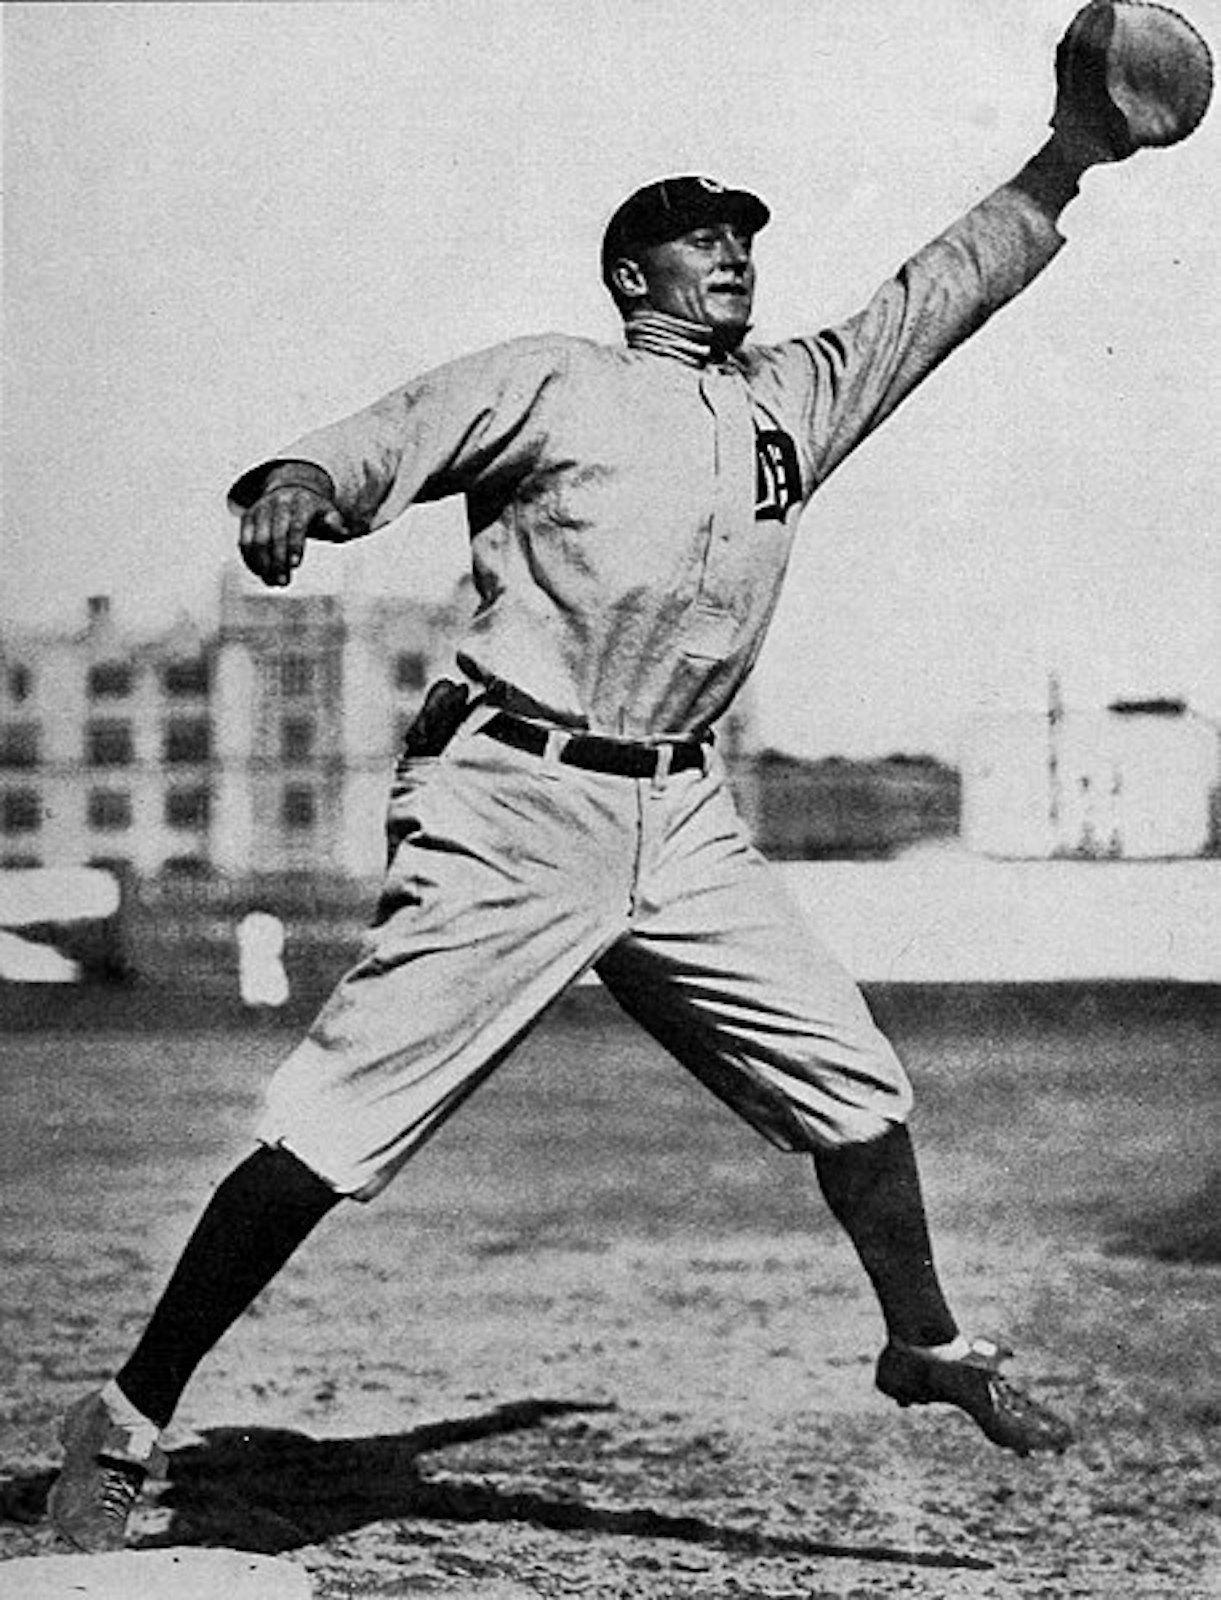 Detroit Tigers legend Ty Cobb is pictured in 1911. Not one to keep his cool, Cobb launched himself into the stands to attack a fan who insulted him in 1912, resulting in a league suspension and sparking his teammates to strike in protest.